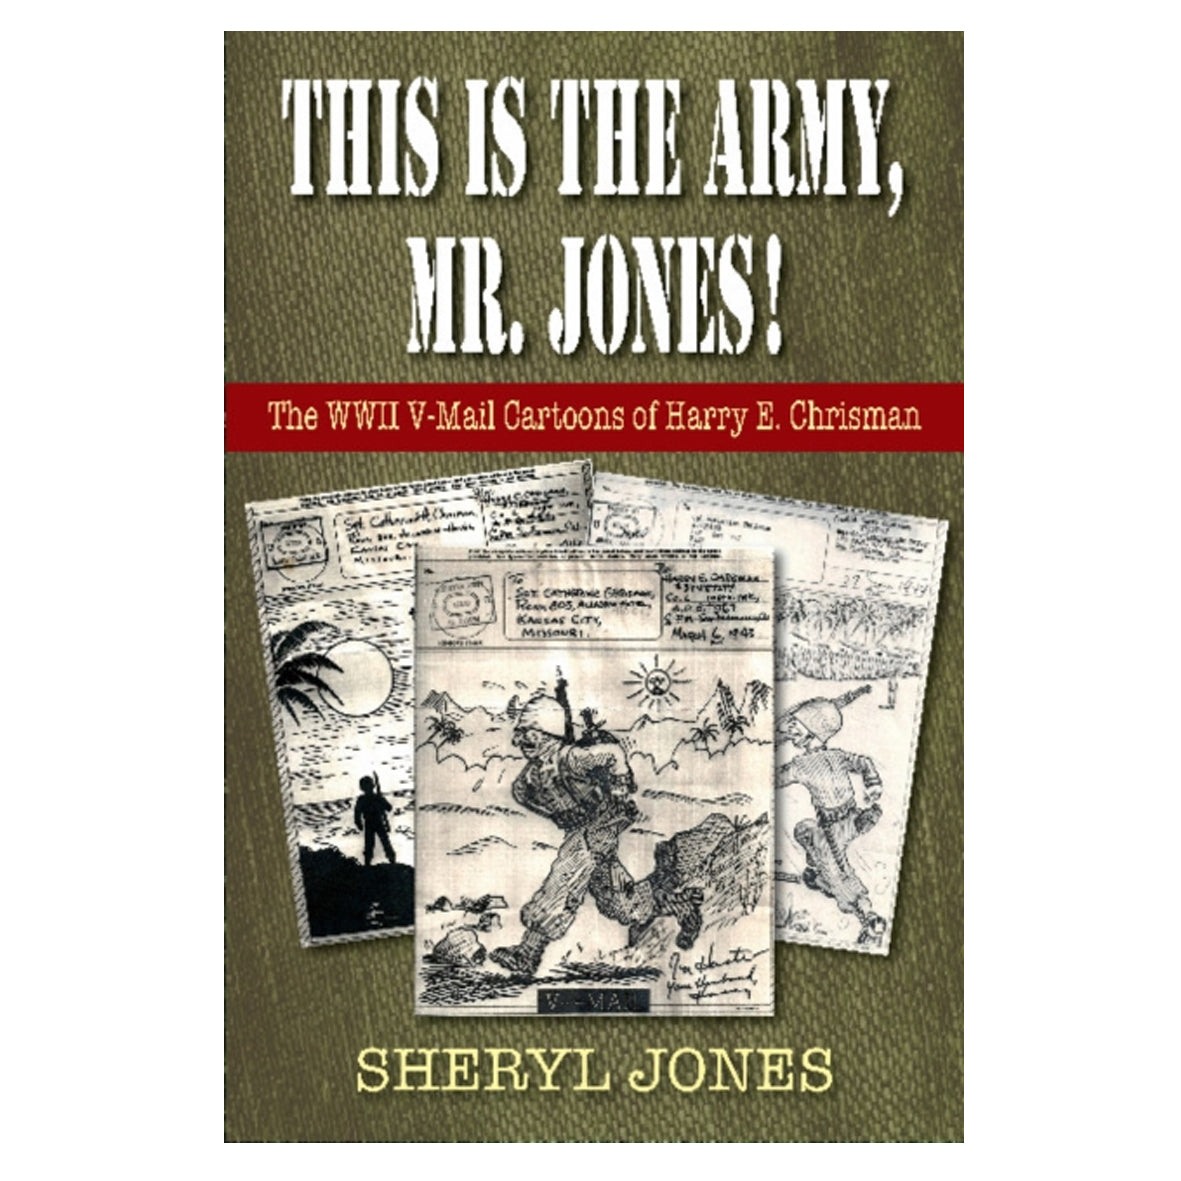 Book - This is the Army Mr Jones